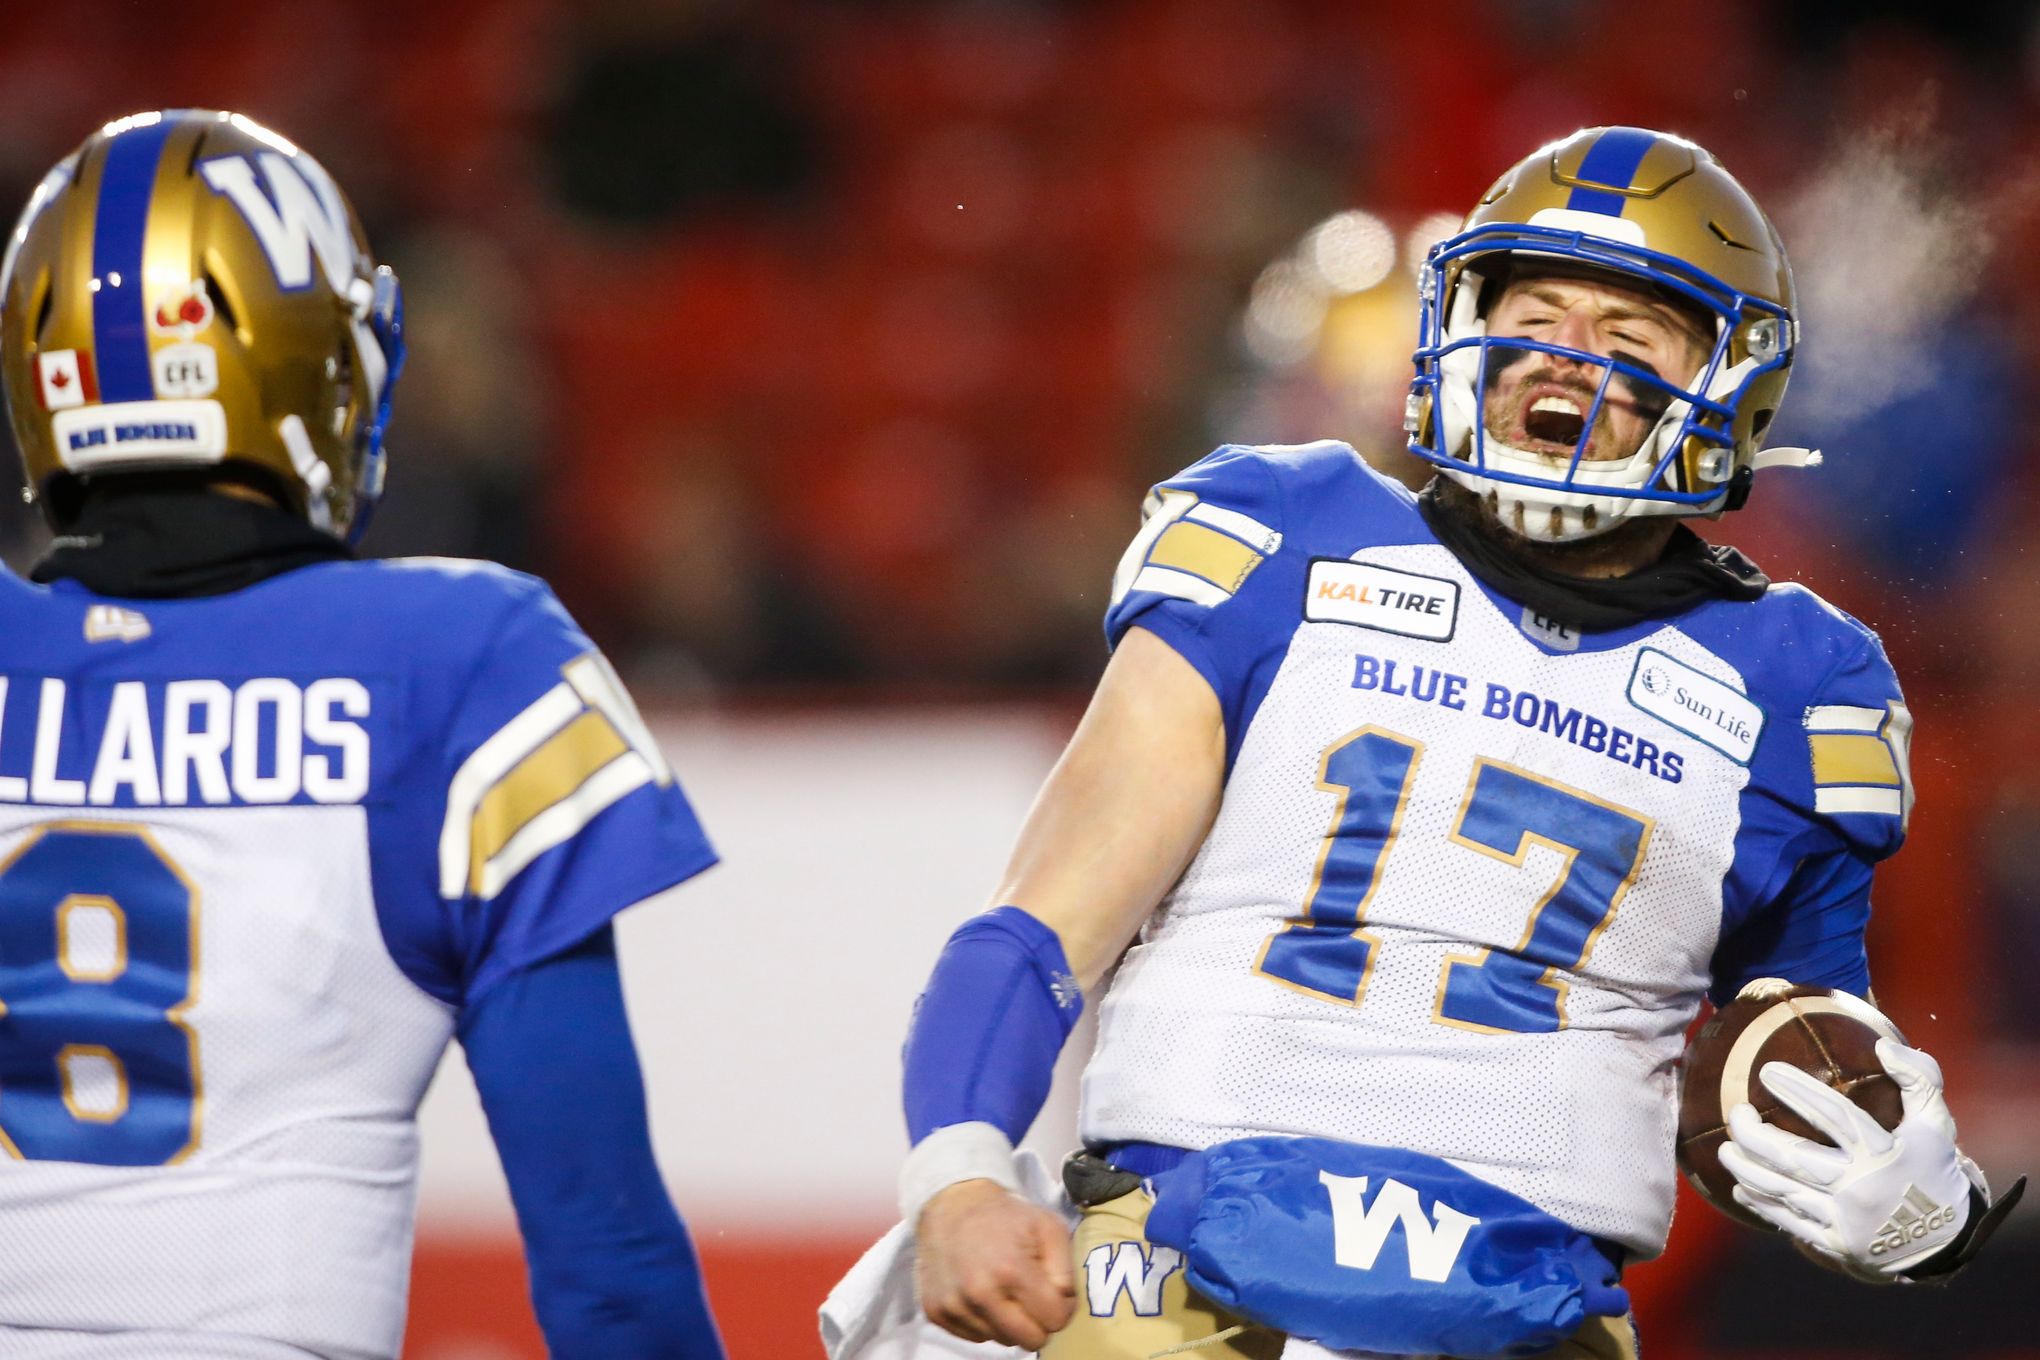 Blue Bombers beat Stampeders 35-14 to reach CFL's West final